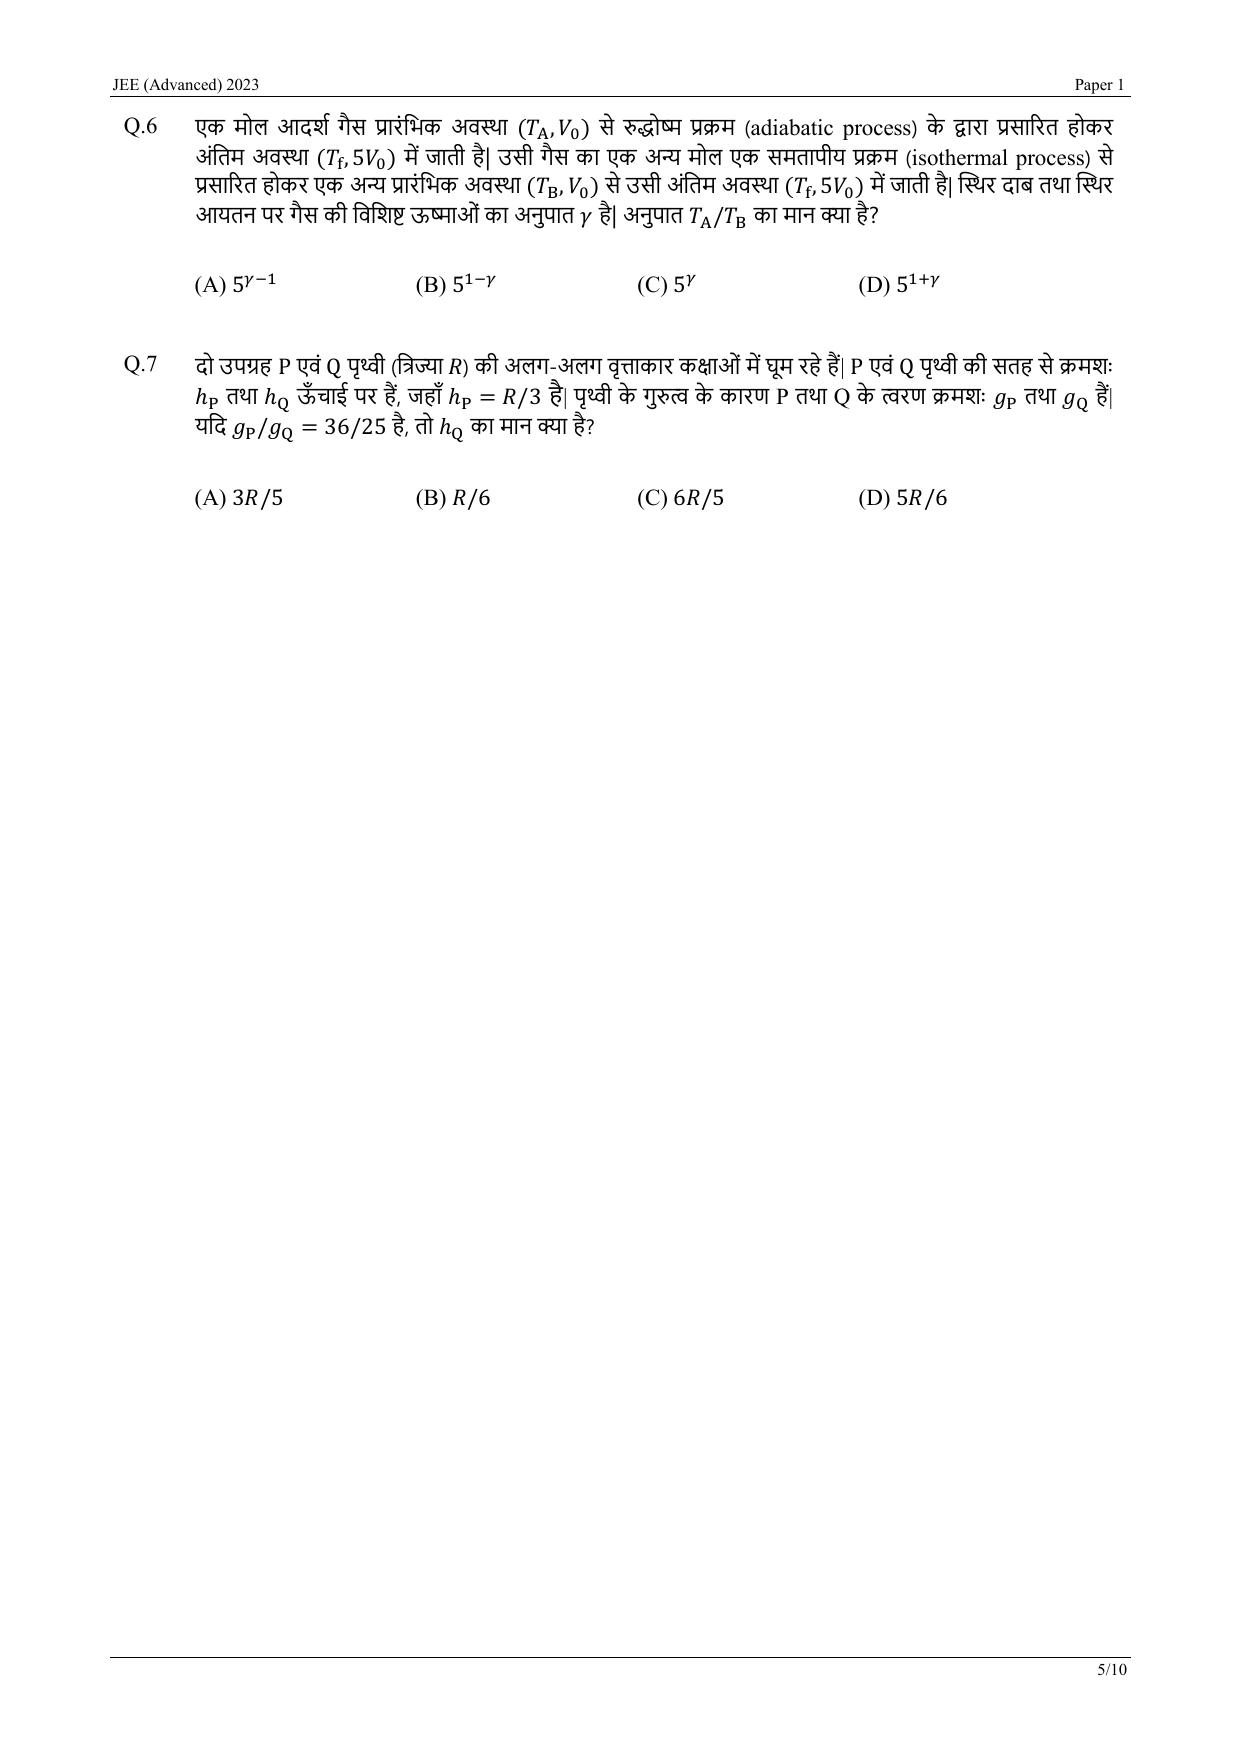 JEE Advanced 2023 Question Paper 1 (Hindi) - Page 15